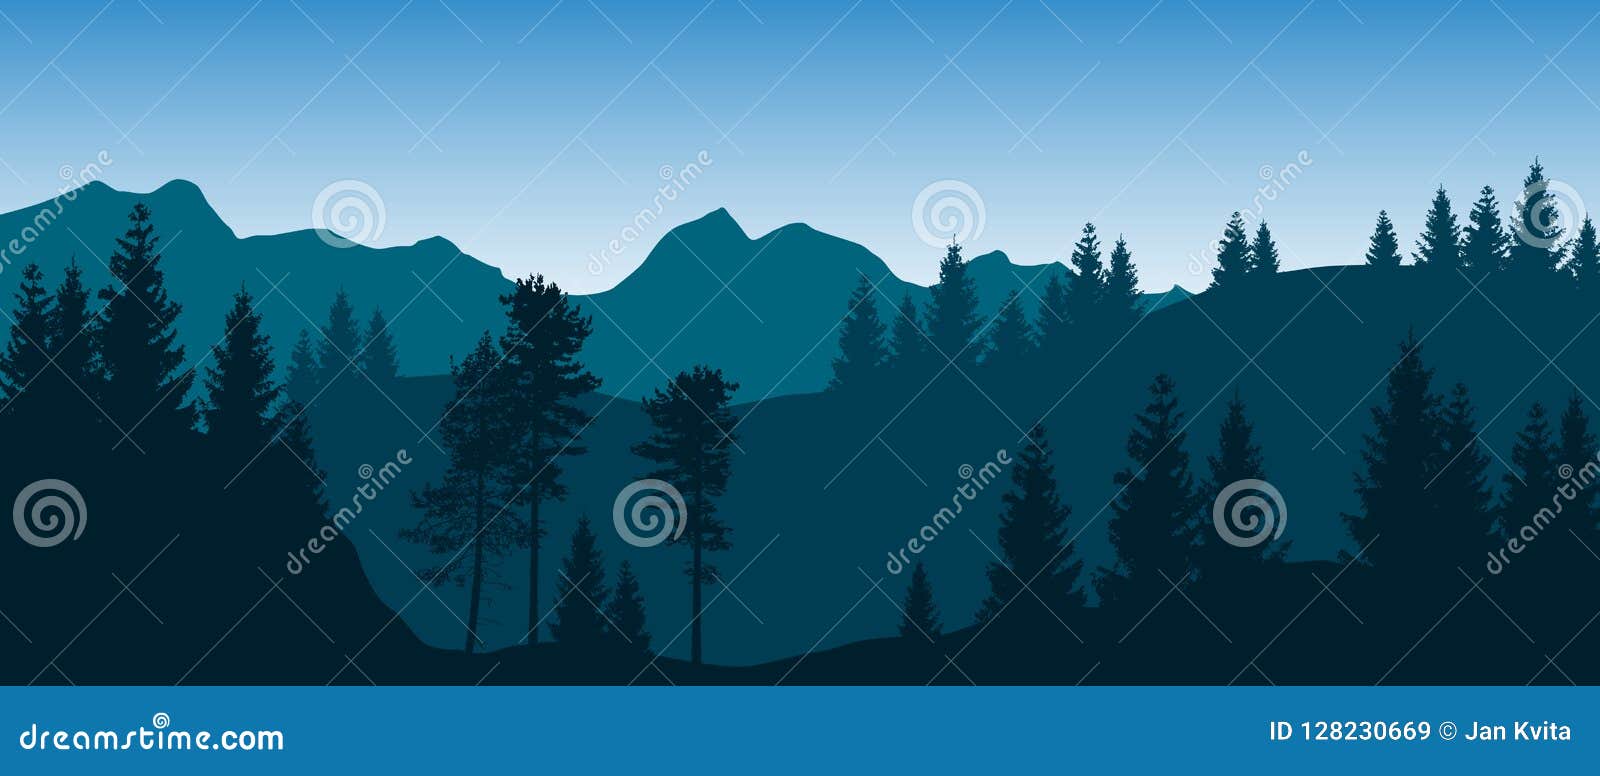 beautiful blue  landscape with layered forested mountains